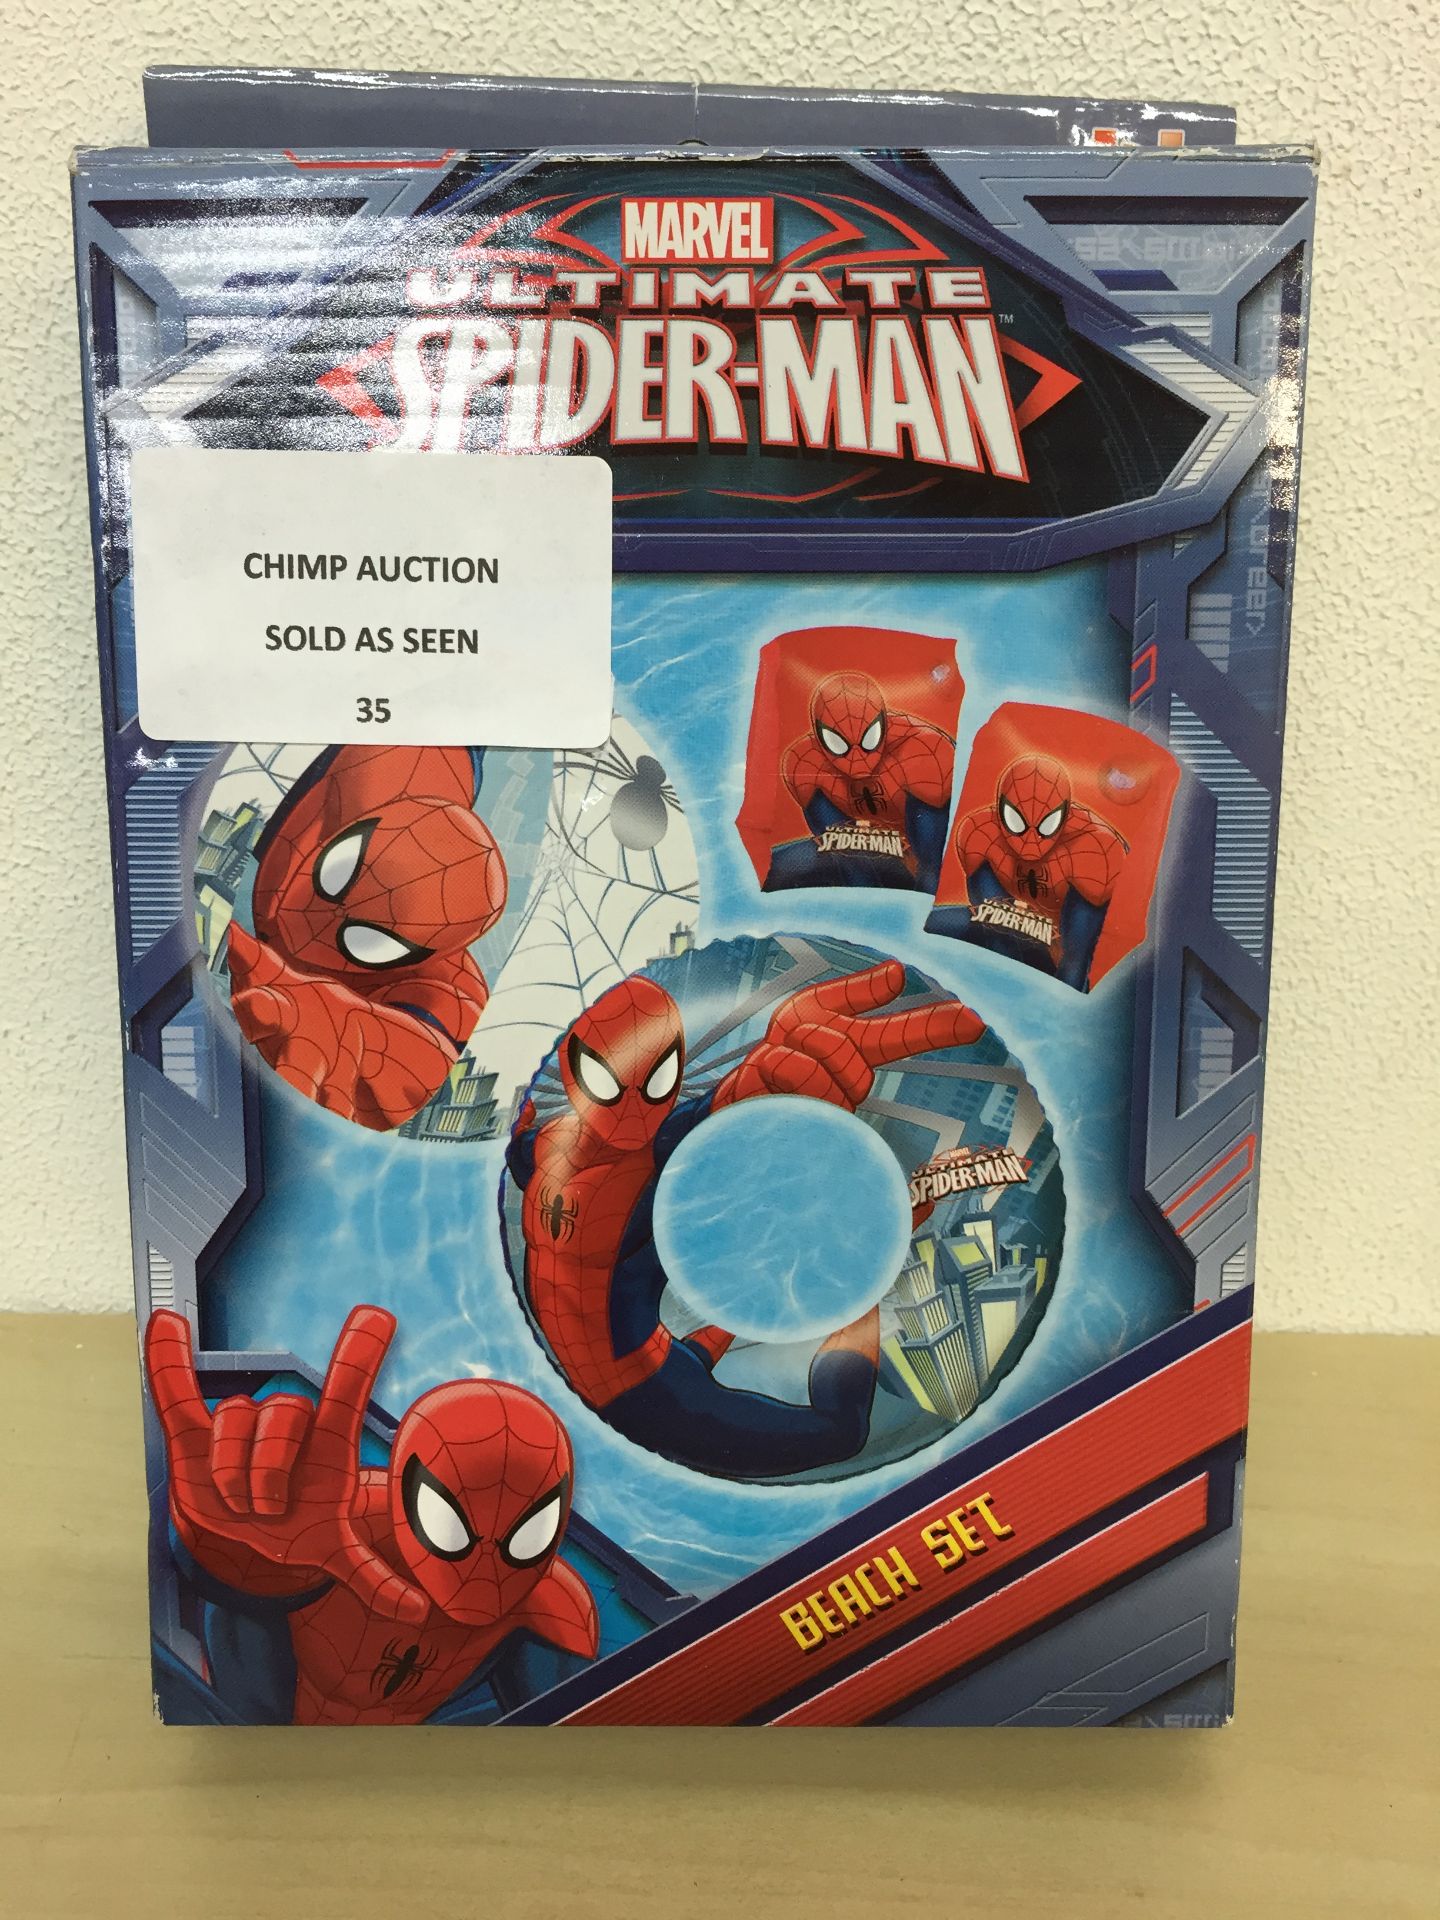 BOXED MARVEL ULTIMATE SPIDER-MAN KID'S BEACH SET RRP £19.99